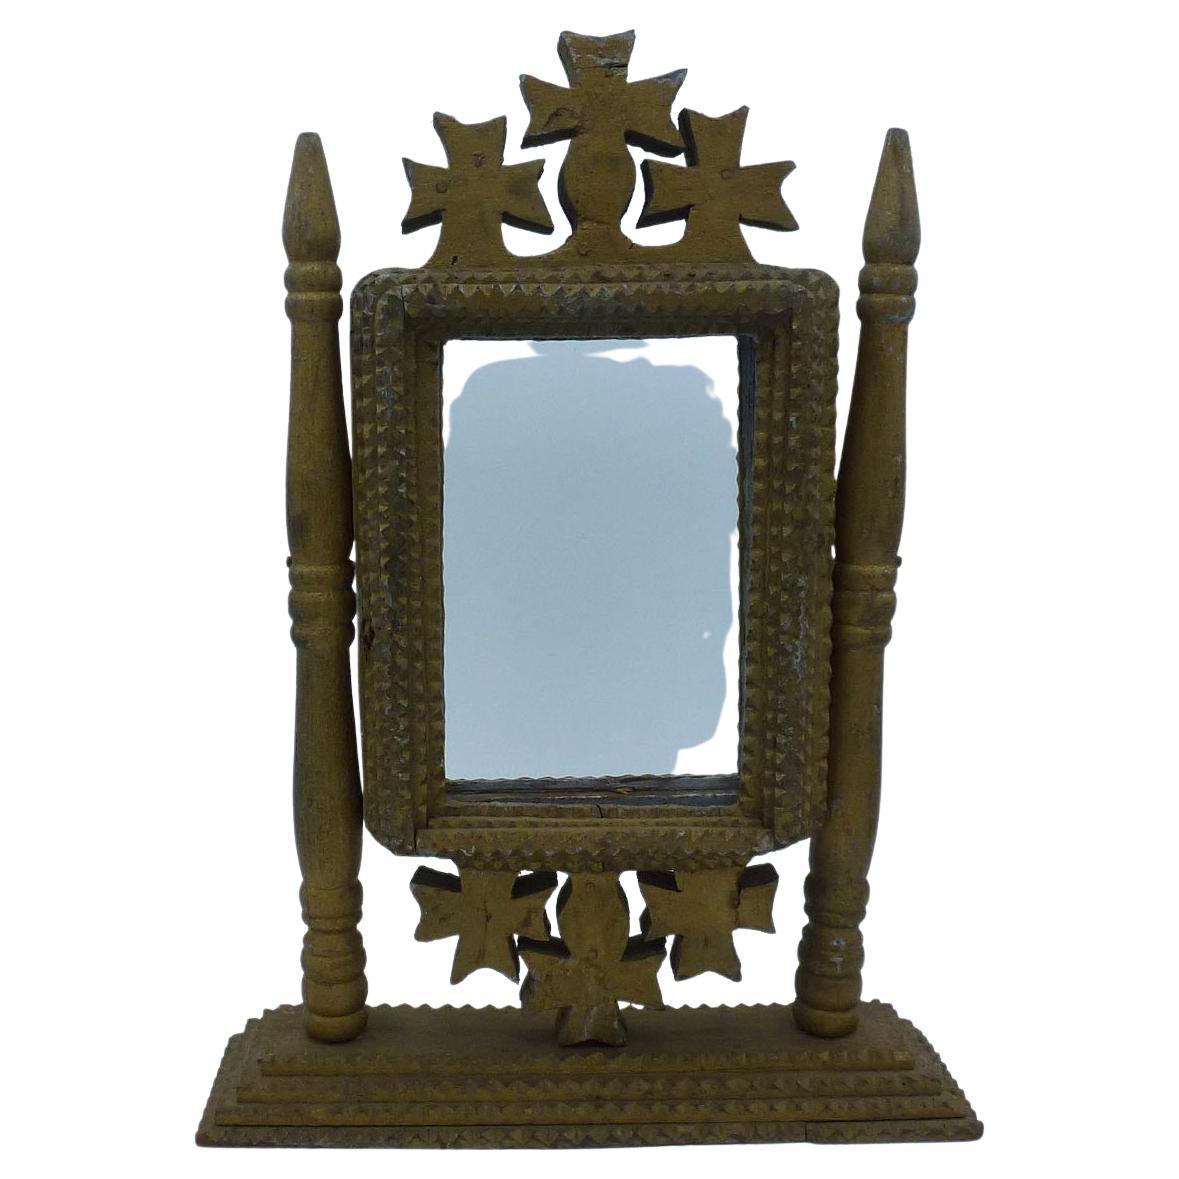 2-Sided, Free-Standing Tramp Art Frame Painted an Old, Oxidized Gold over Silver